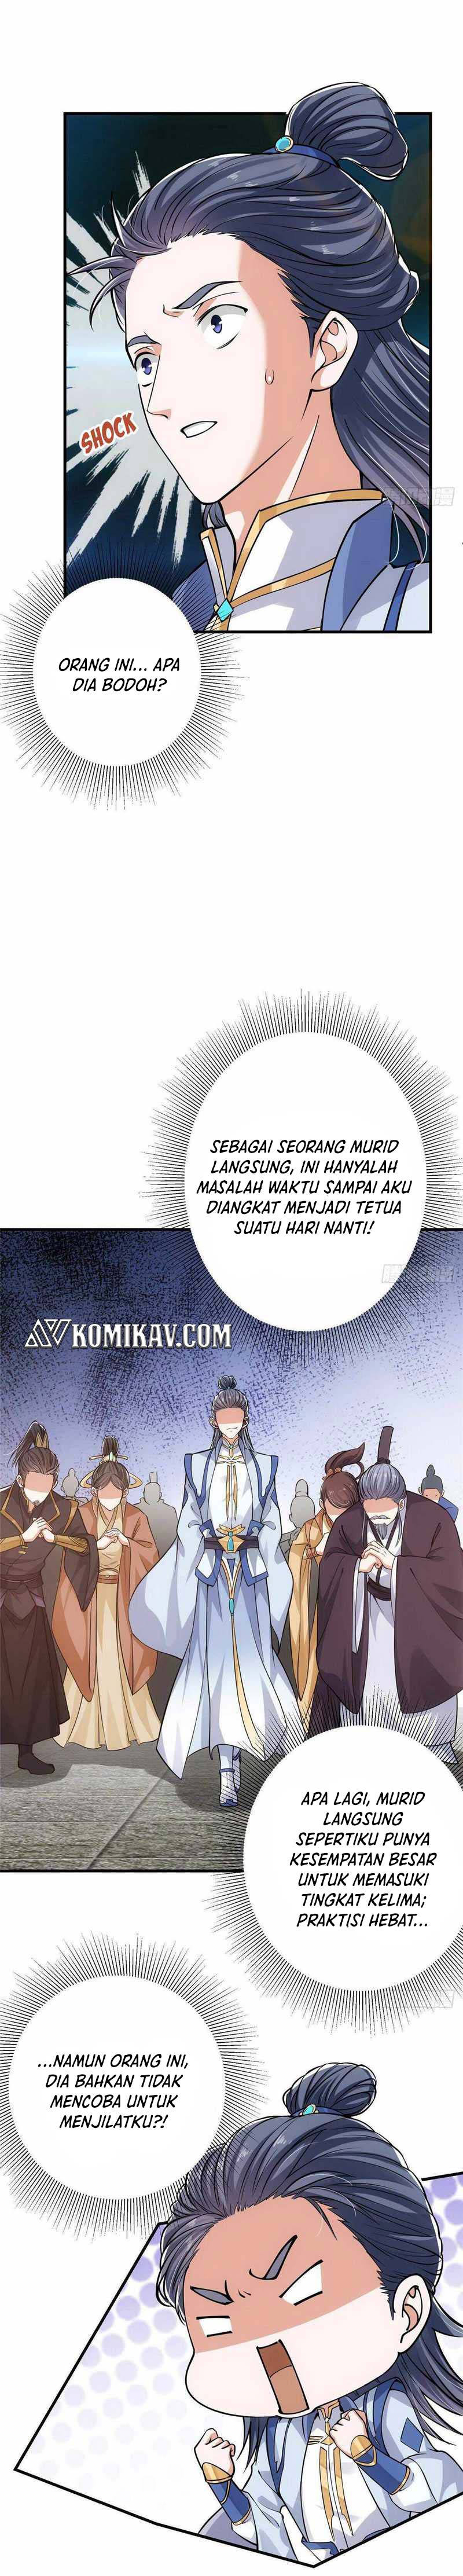 Keep A Low Profile, Sect Leader Chapter 30 Bahasa Indonesia